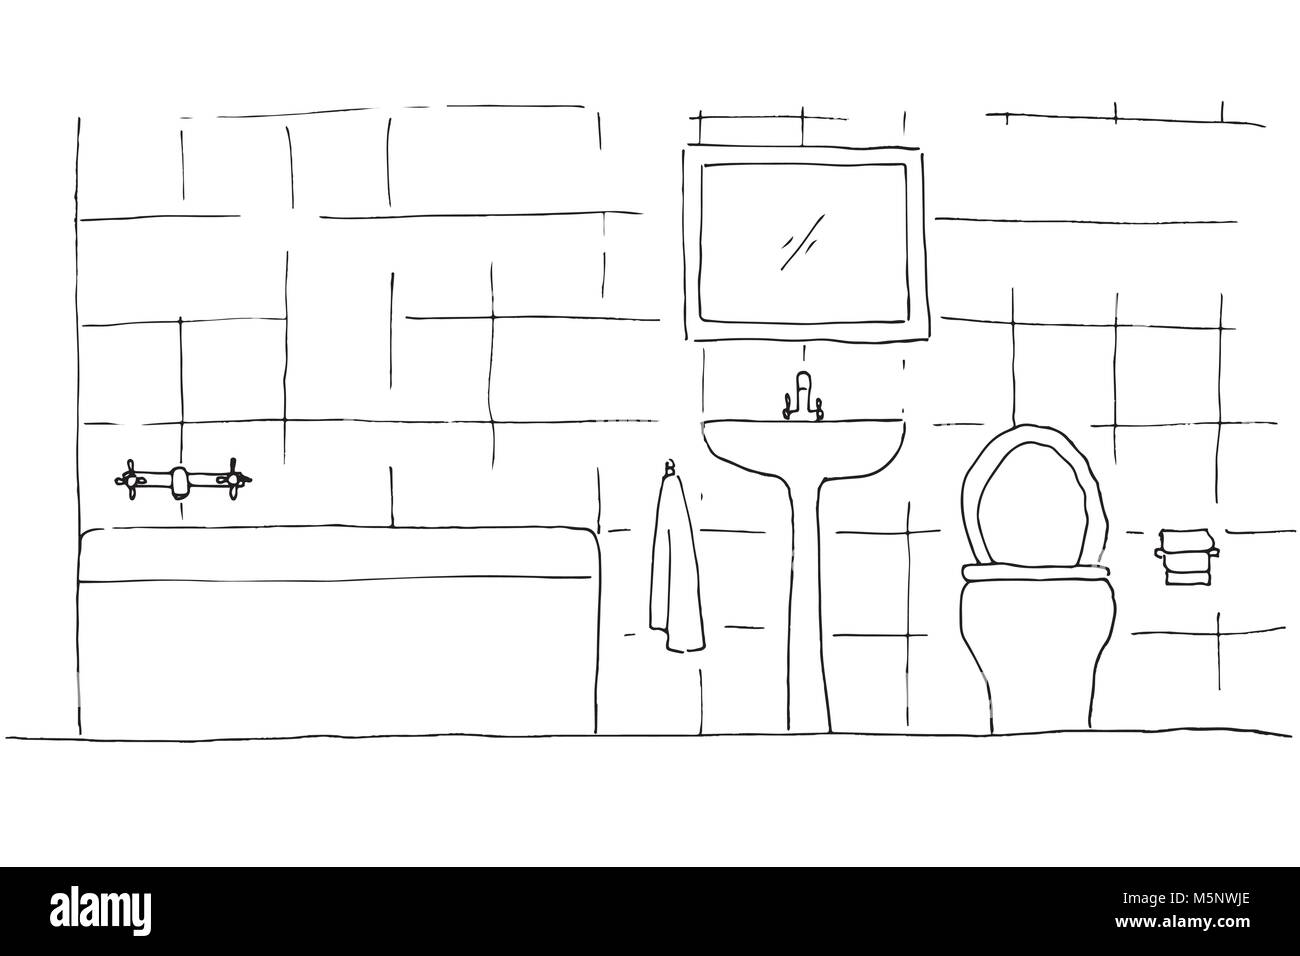 Hand drawn sketch. Linear sketch of an interior. Part of the bathroom. Vector illustration Stock Vector